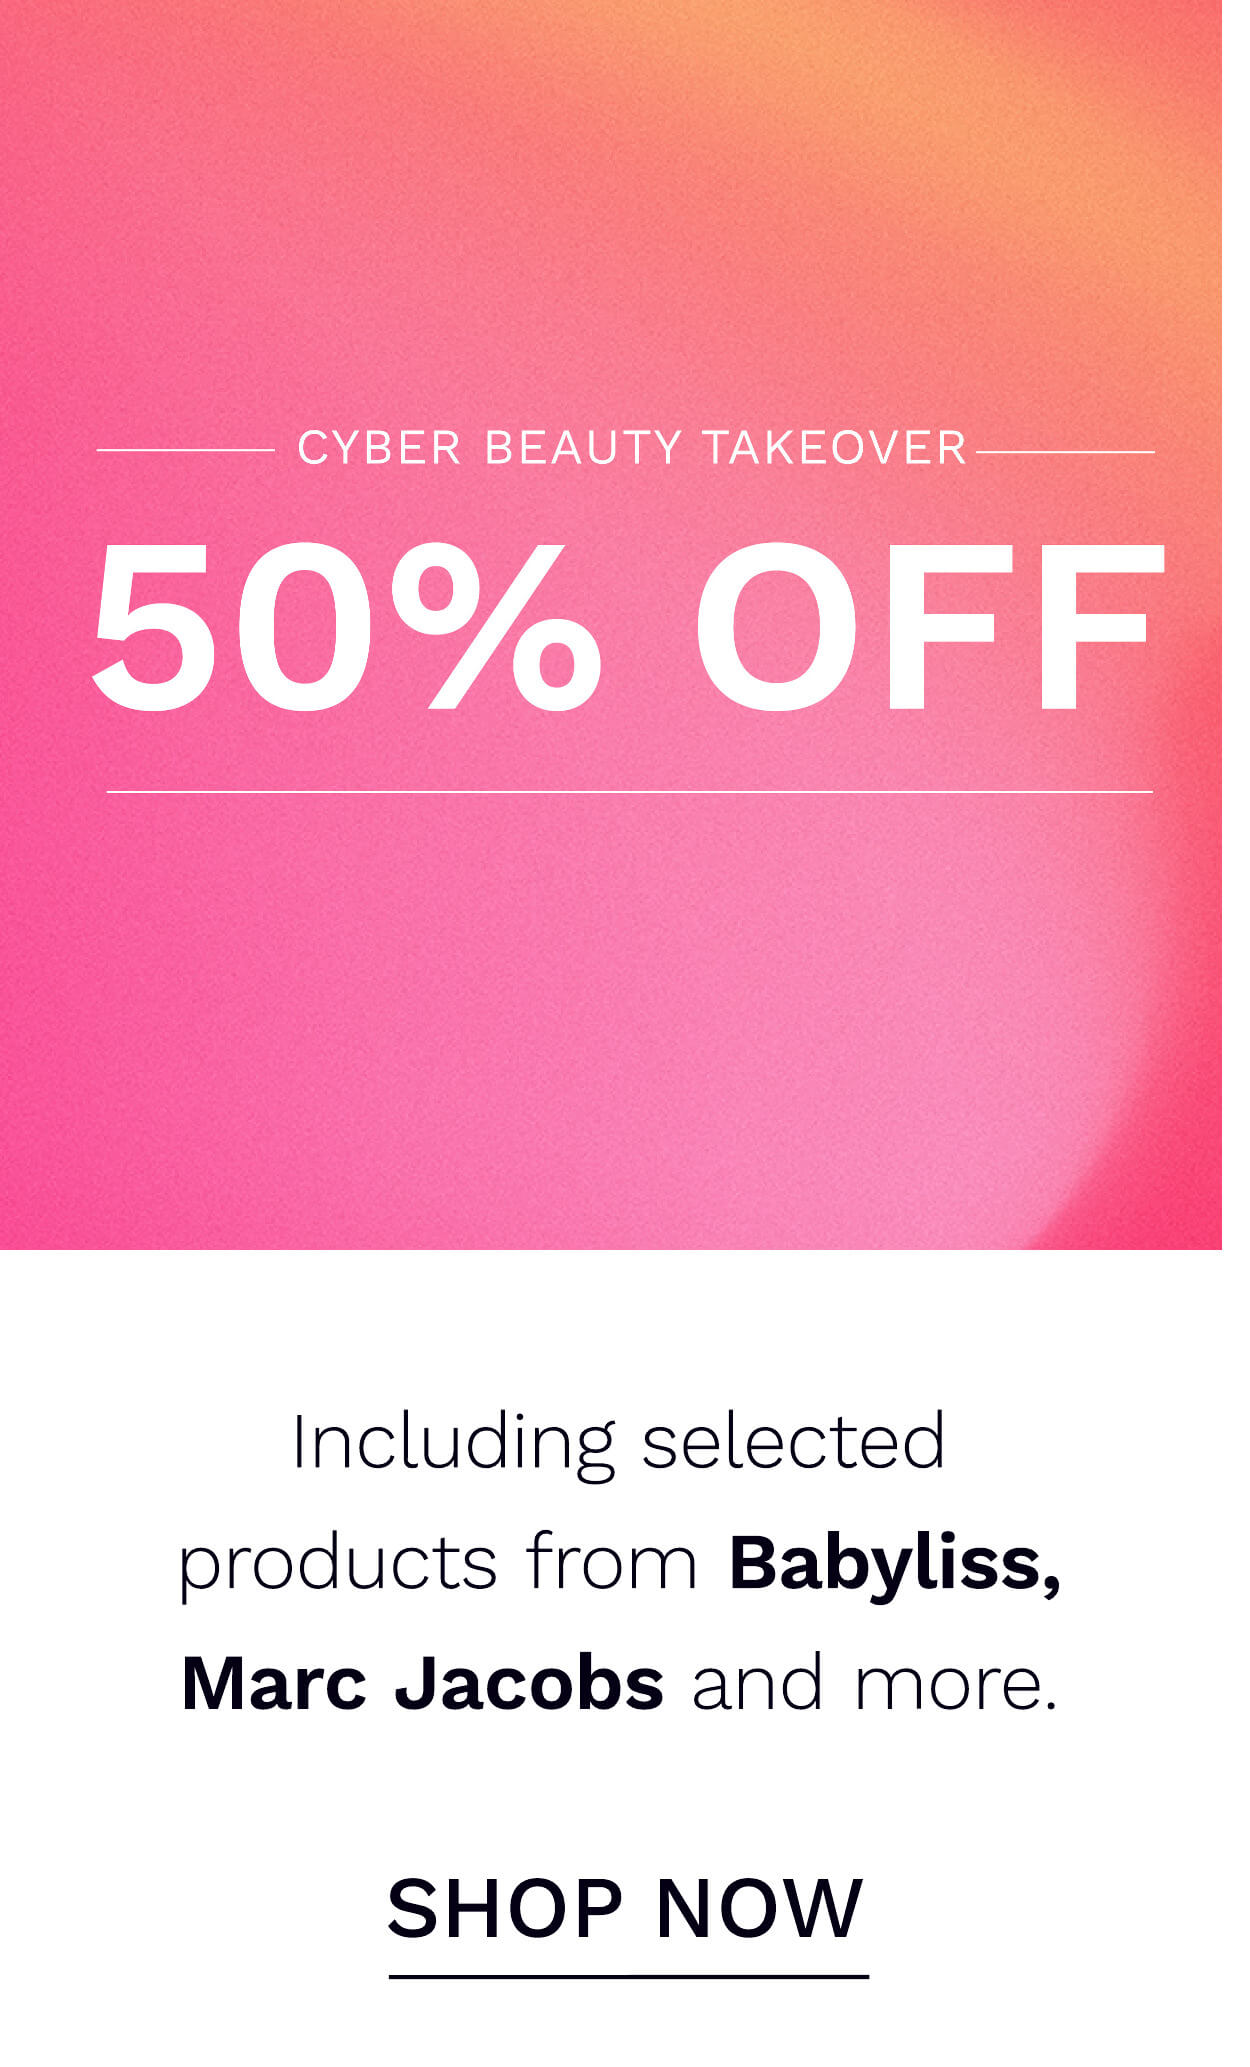 SAVE 50 PERCENT OFF SELECTED PRODUCTS